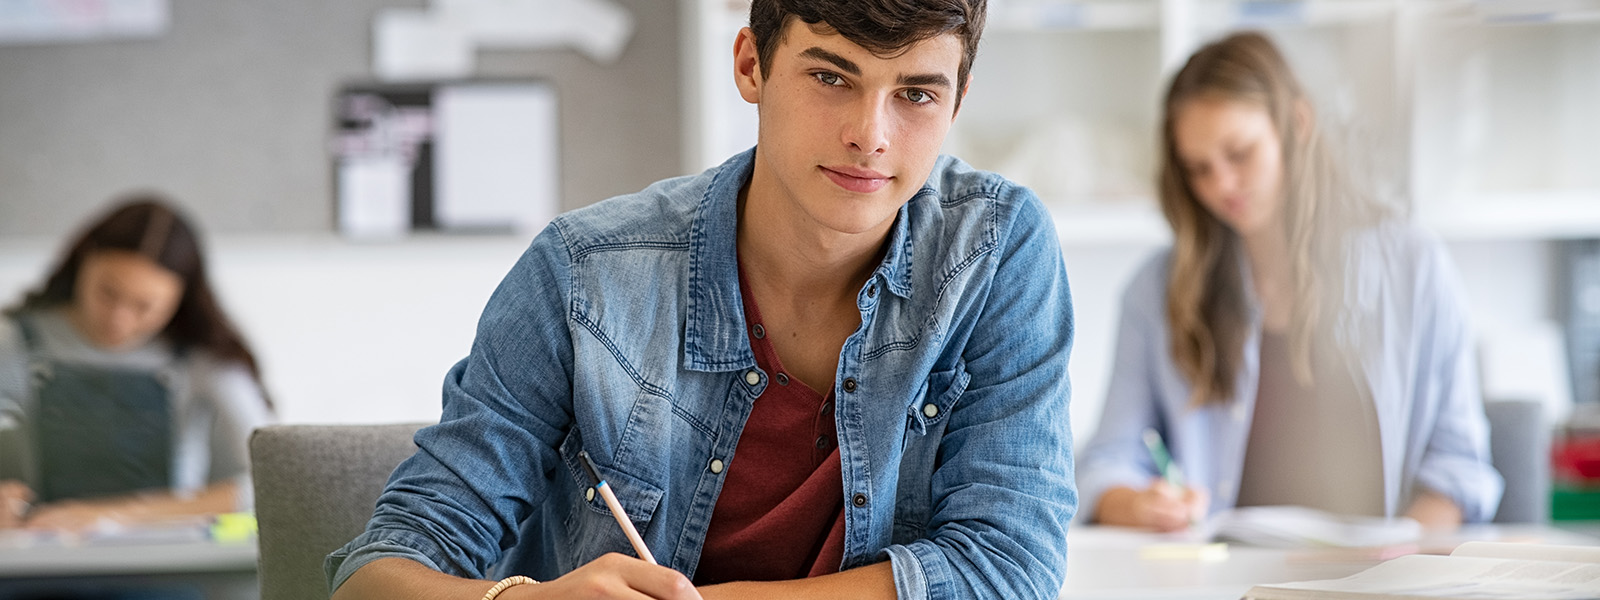 Male high school student in class looking forward